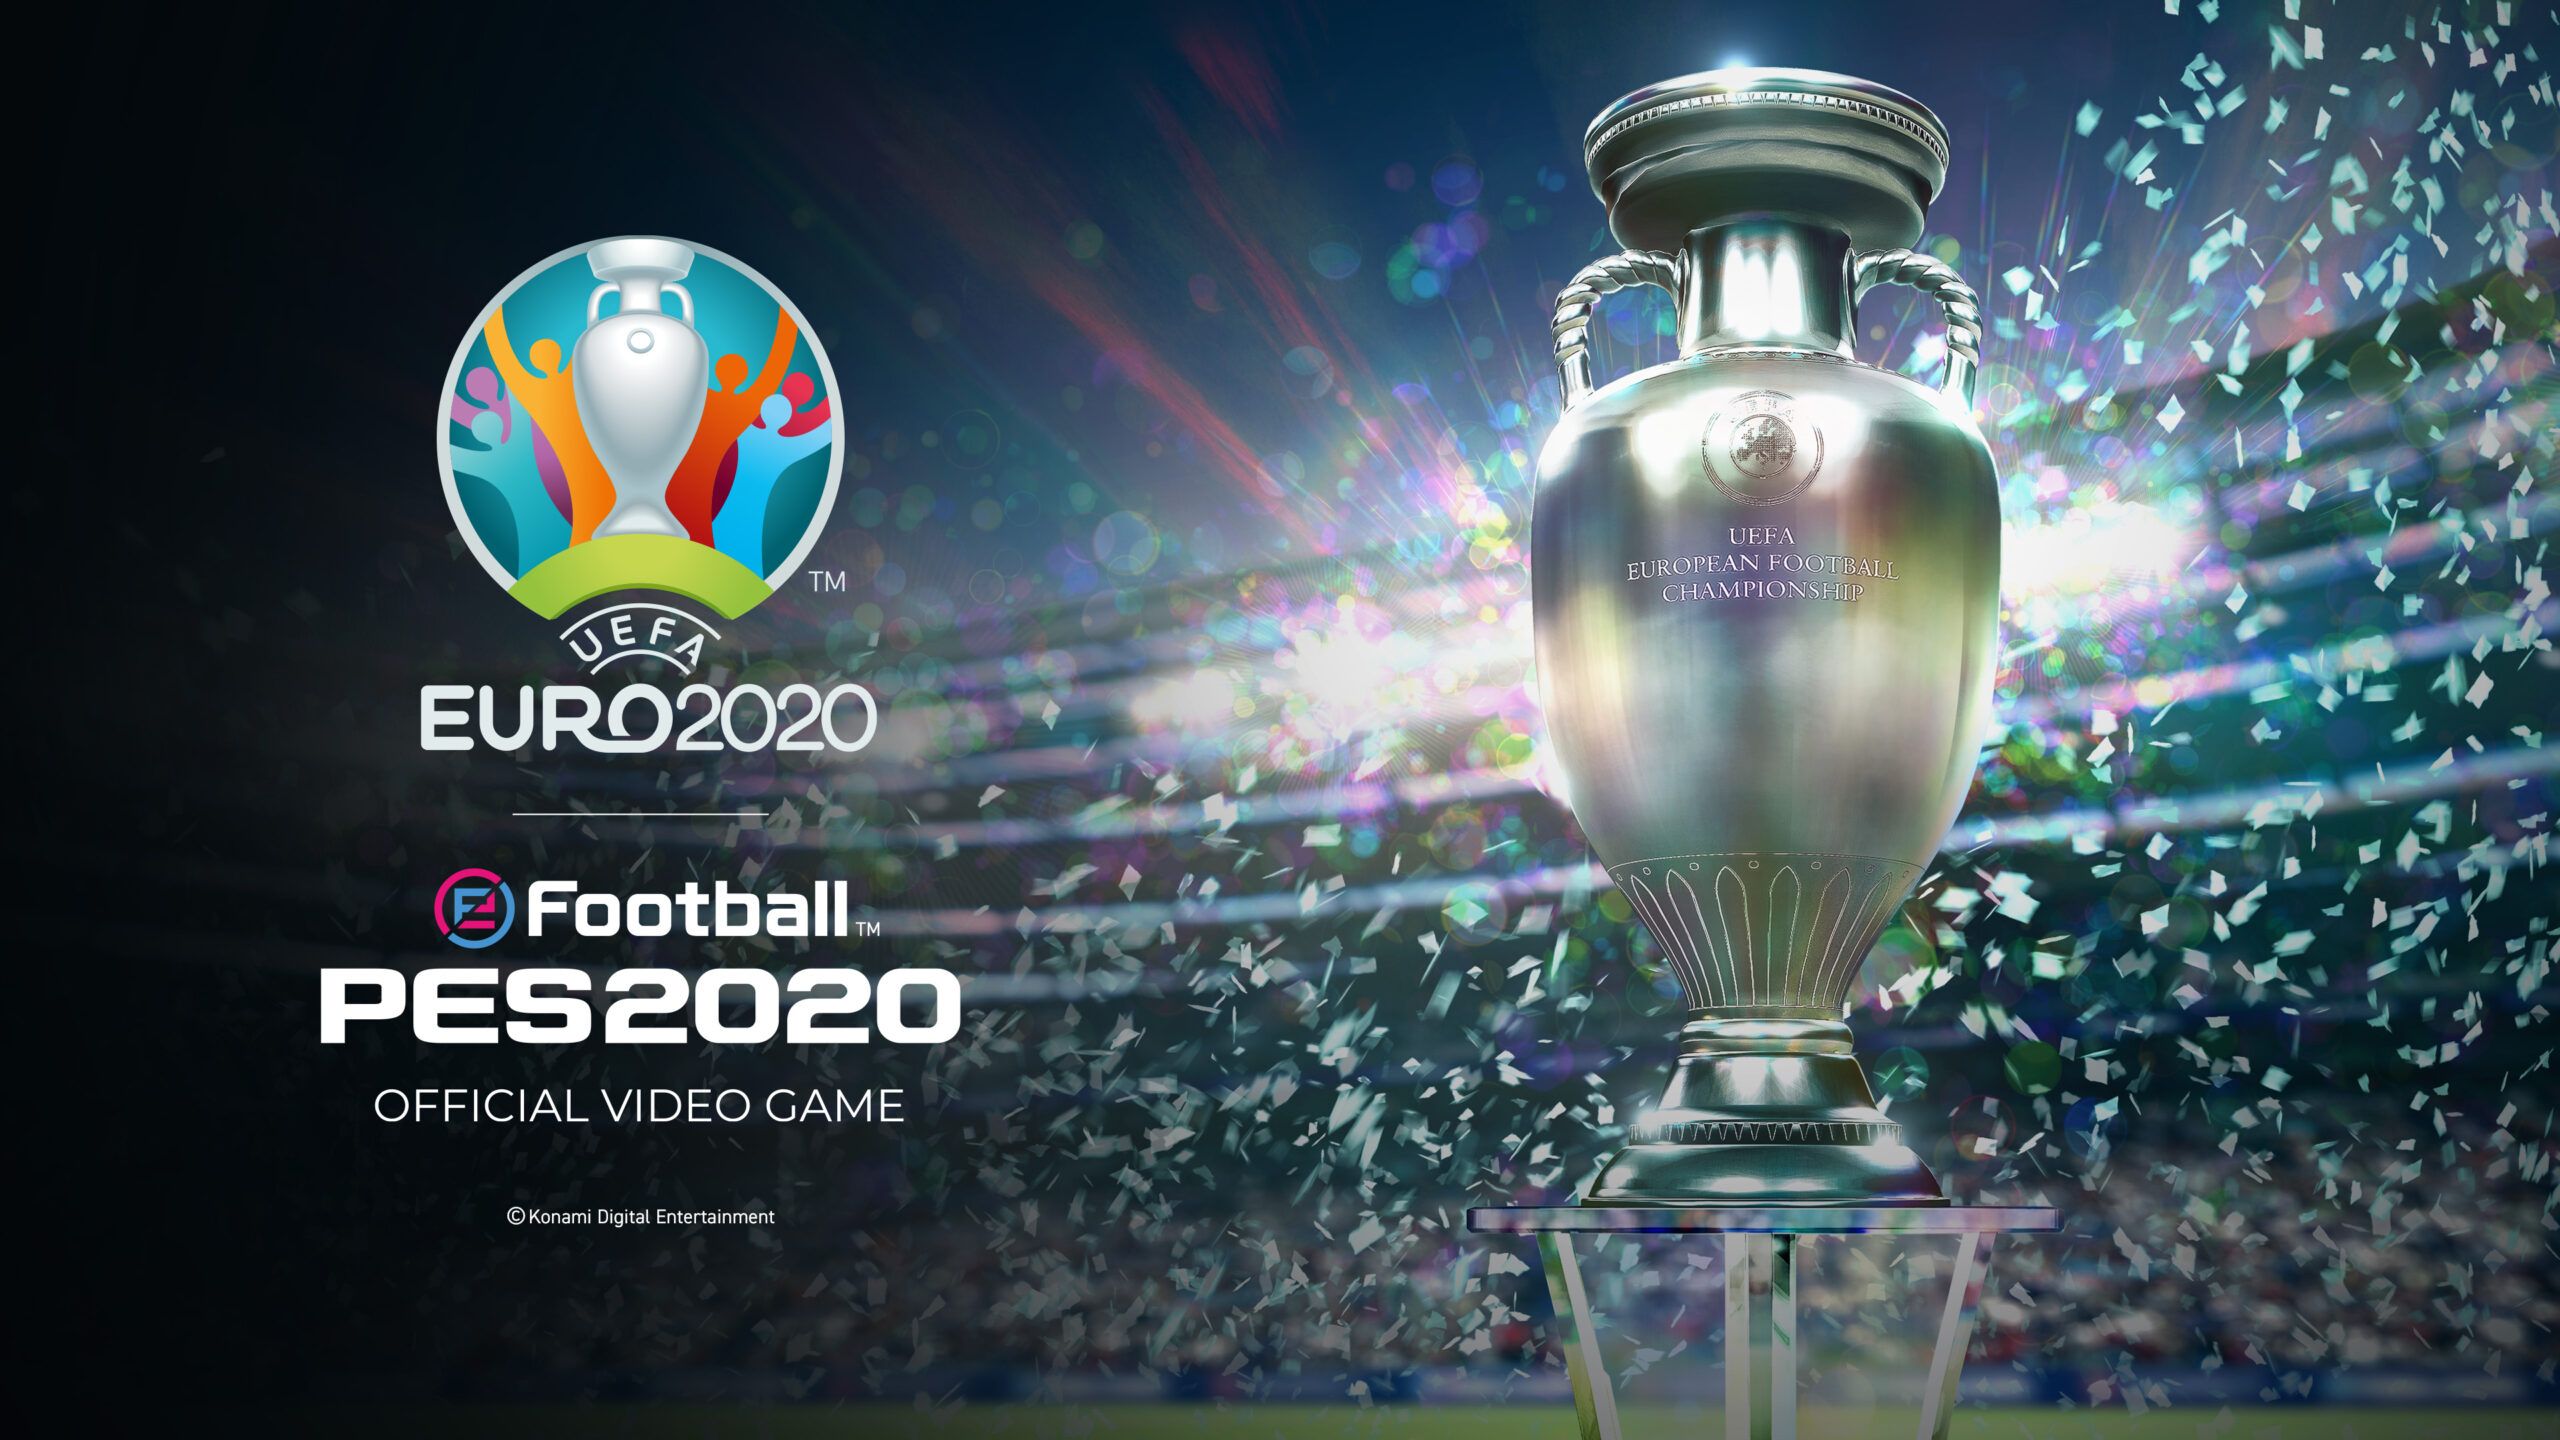 eFootball PES 2020: The free UEFA EURO 2020 DLC will be released